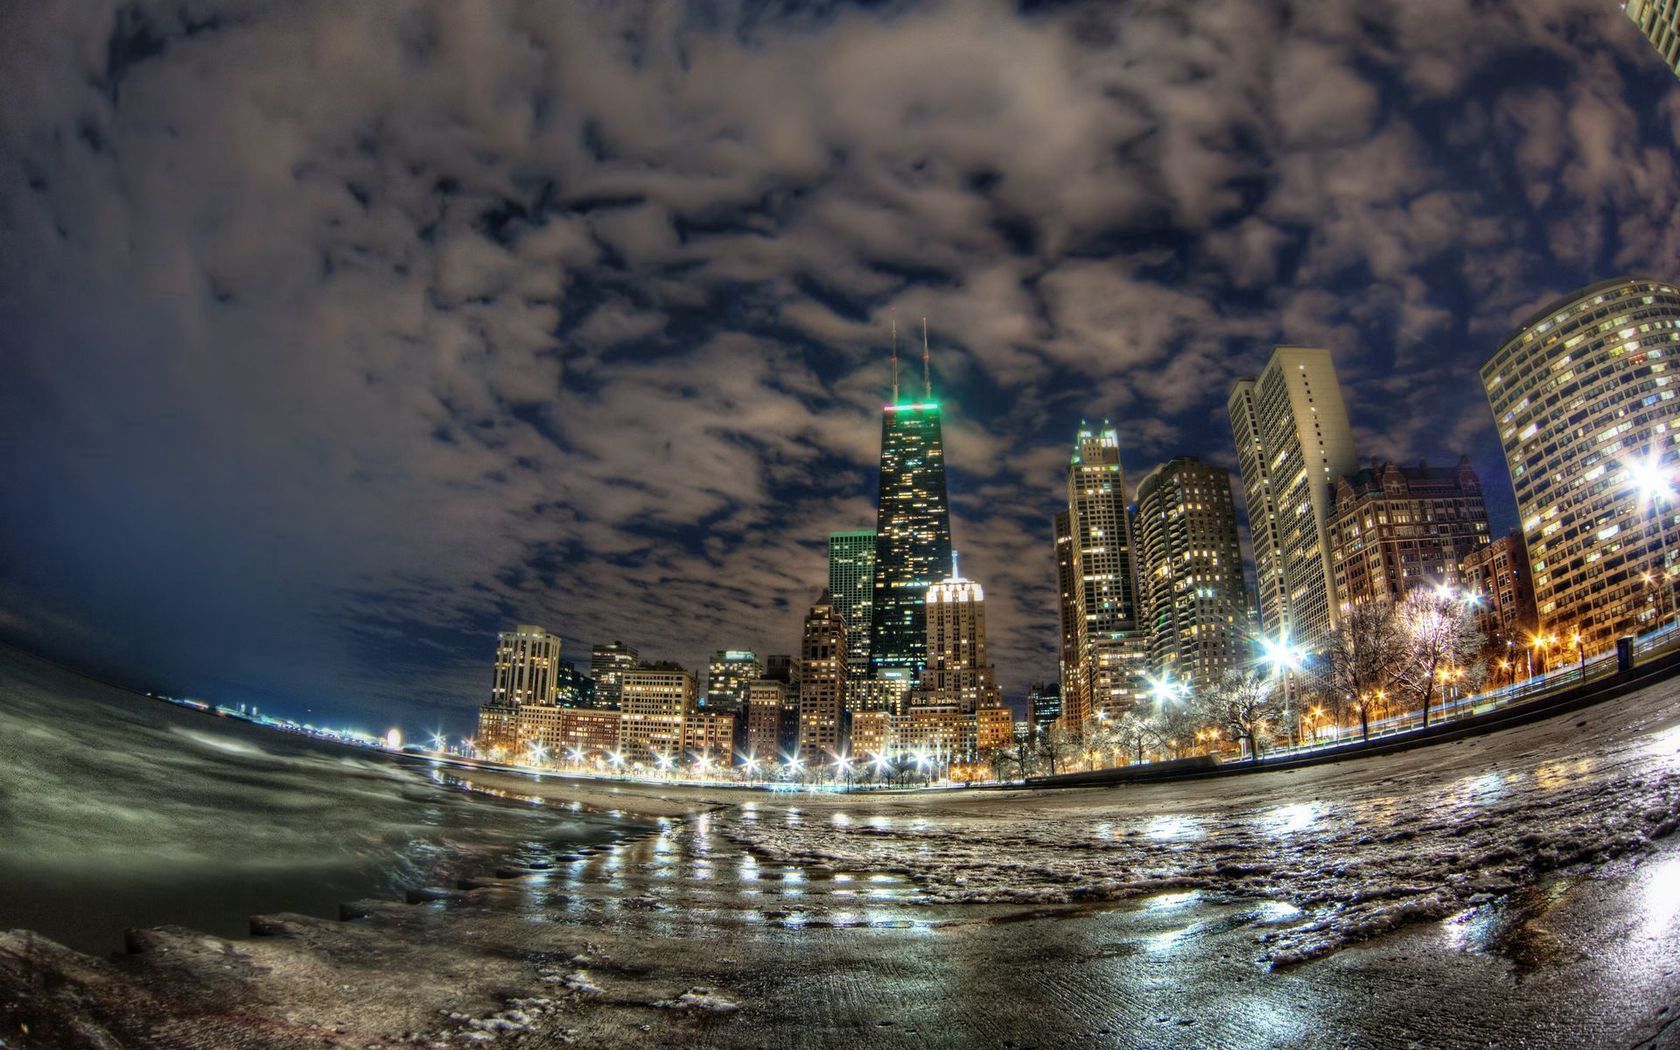 fish eye, lights, night city, building Chicago Cellphone FHD pic